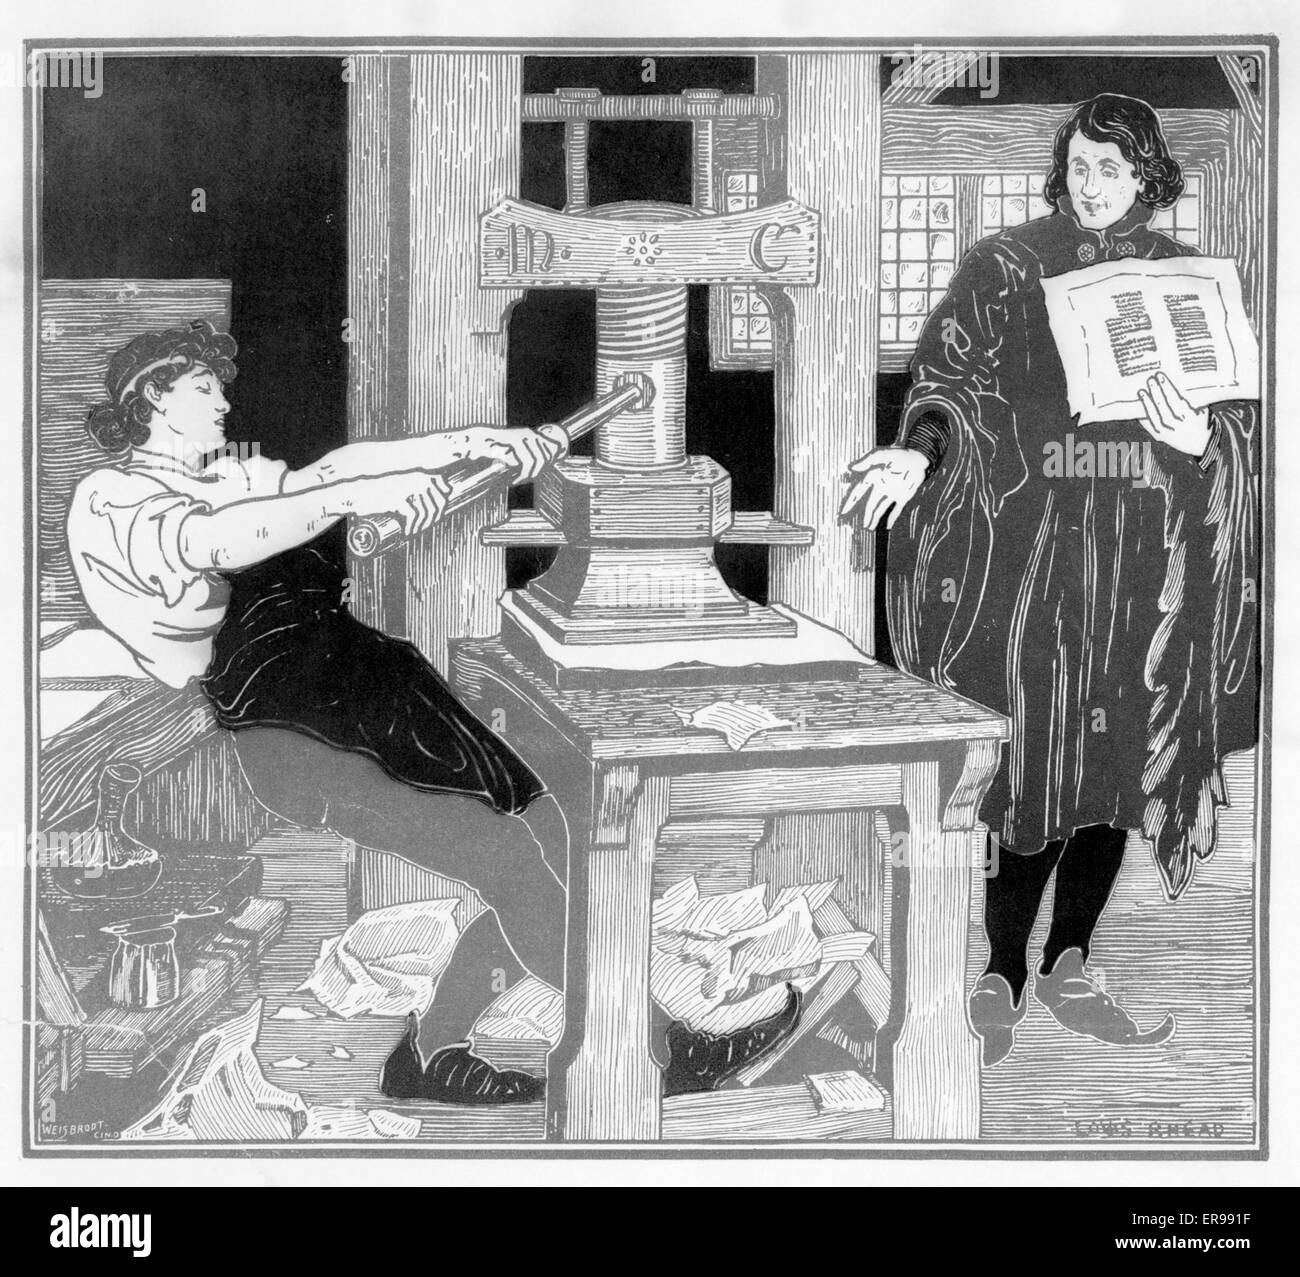 William Caxton made his own ink, but you can have yours made by The Ault &amp; Wiborg Co., Cincinnati. Poster showing two men with printing press. Date 1896. Detail. William Caxton made his own ink, but you can have yours made by The Ault &amp; Wiborg Co. Stock Photo